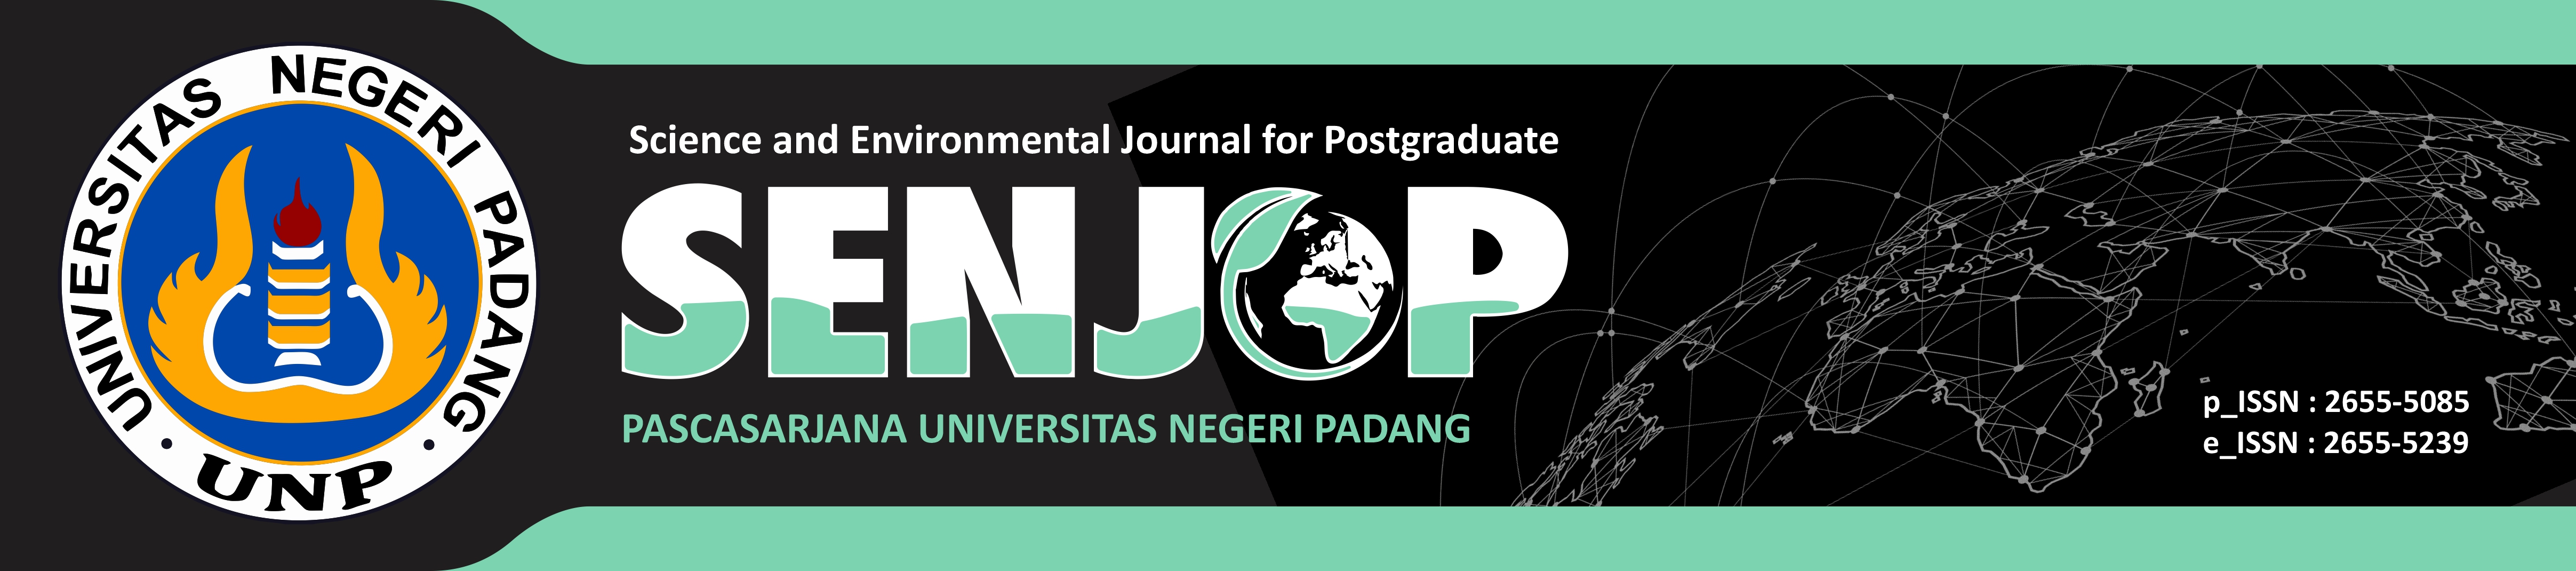 Science and Environmental Journal for Postgraduate